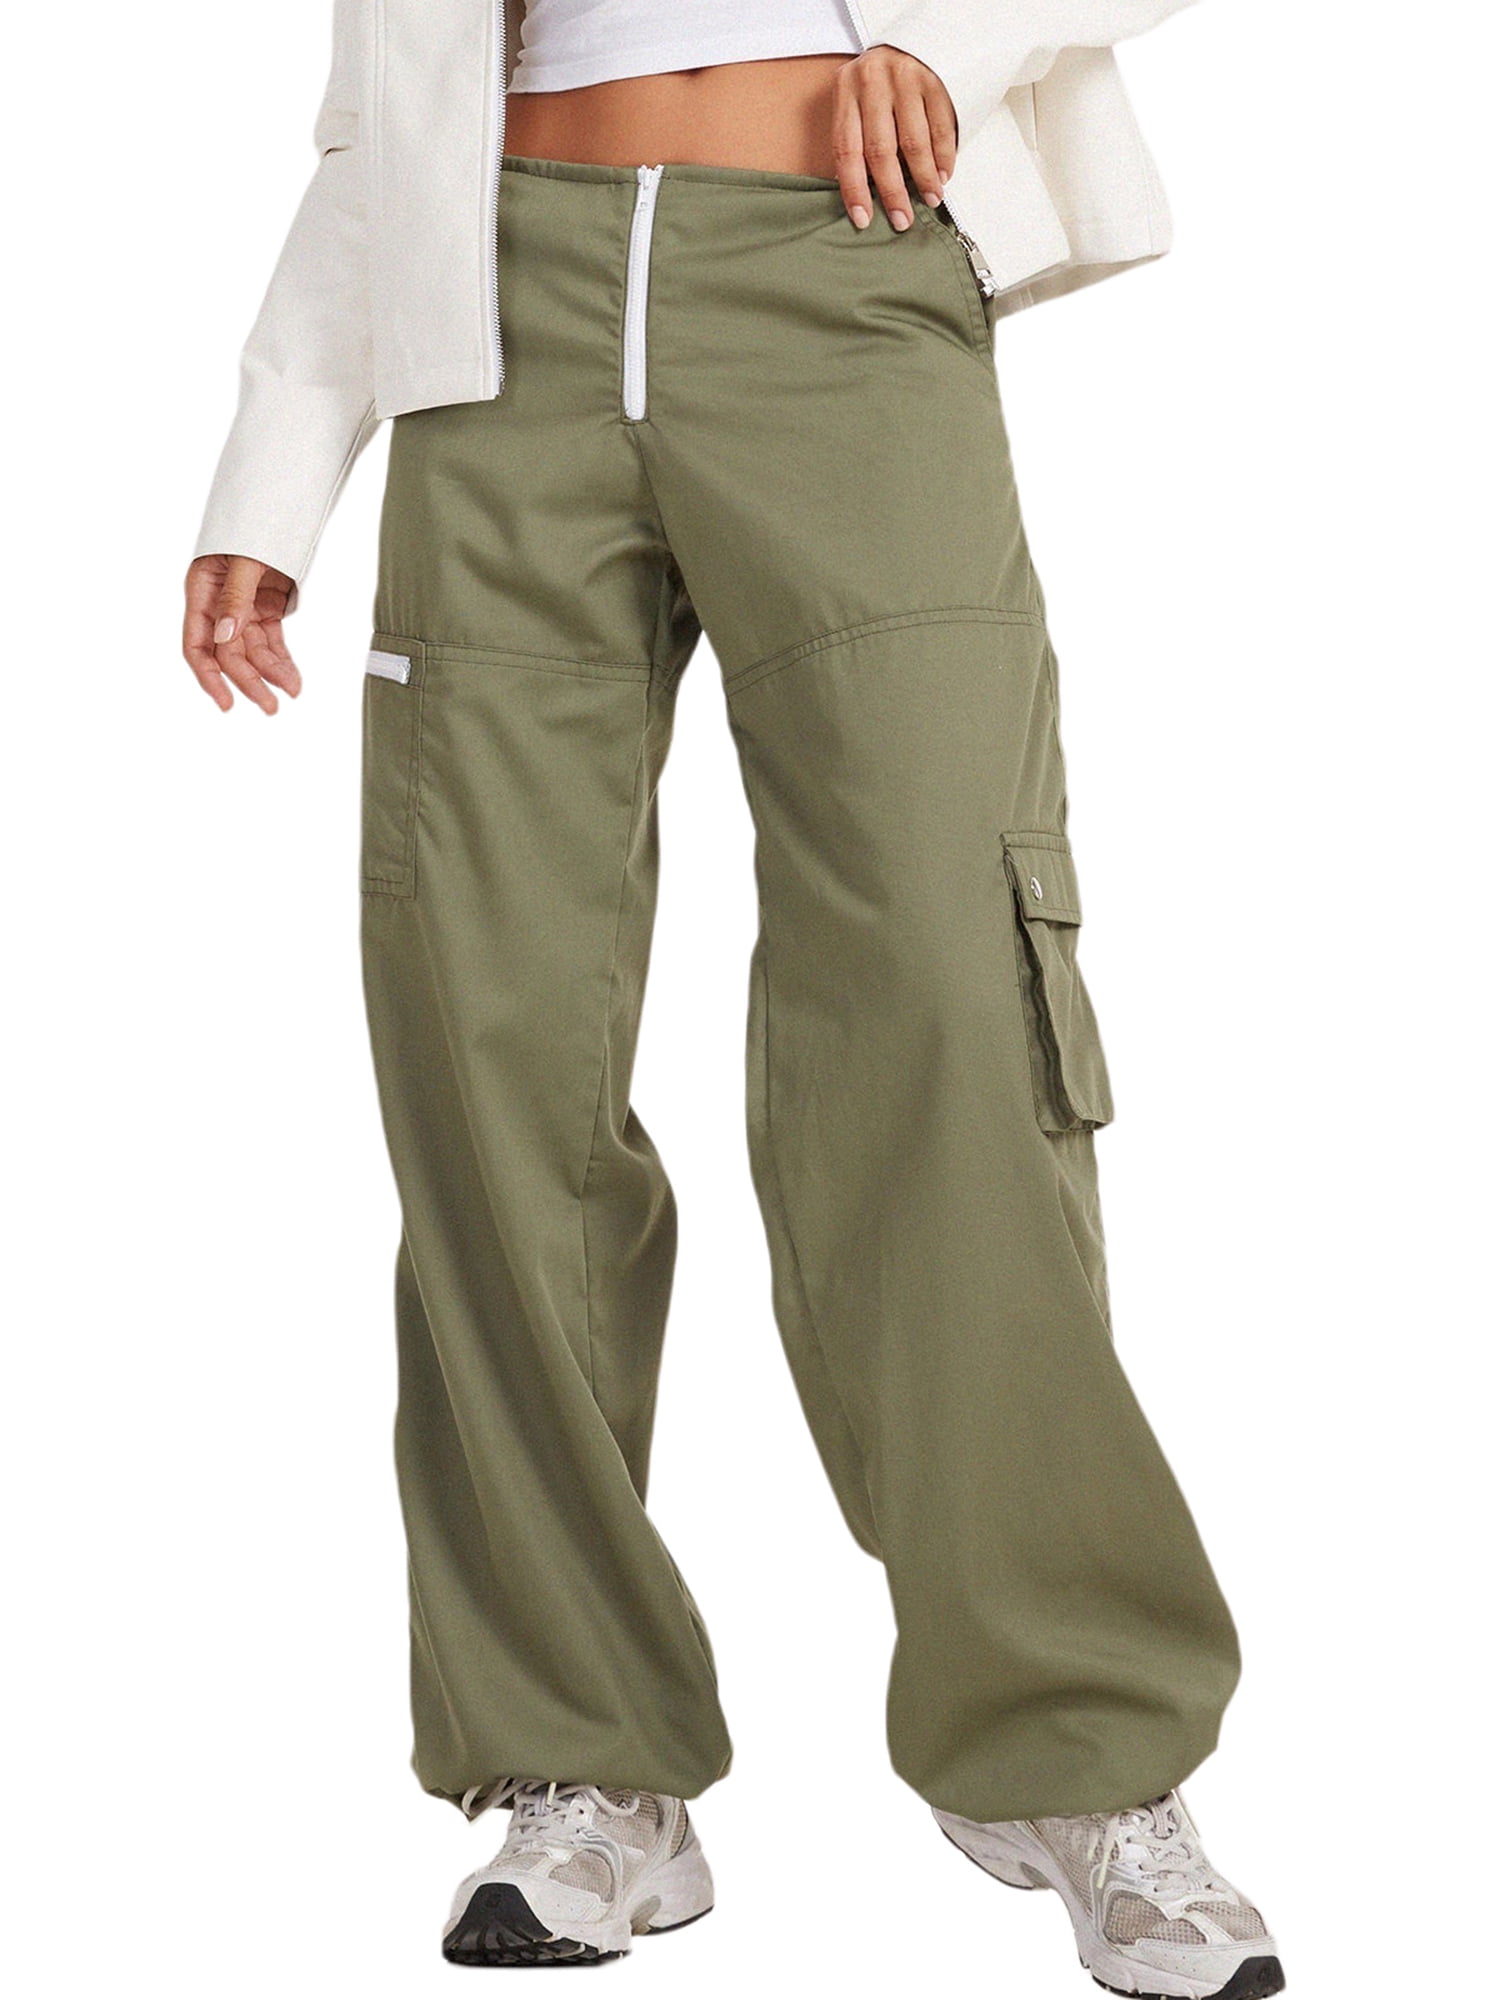 Cargo Pants For Women  Girls  20 Ladies Cargo Pants Outfits